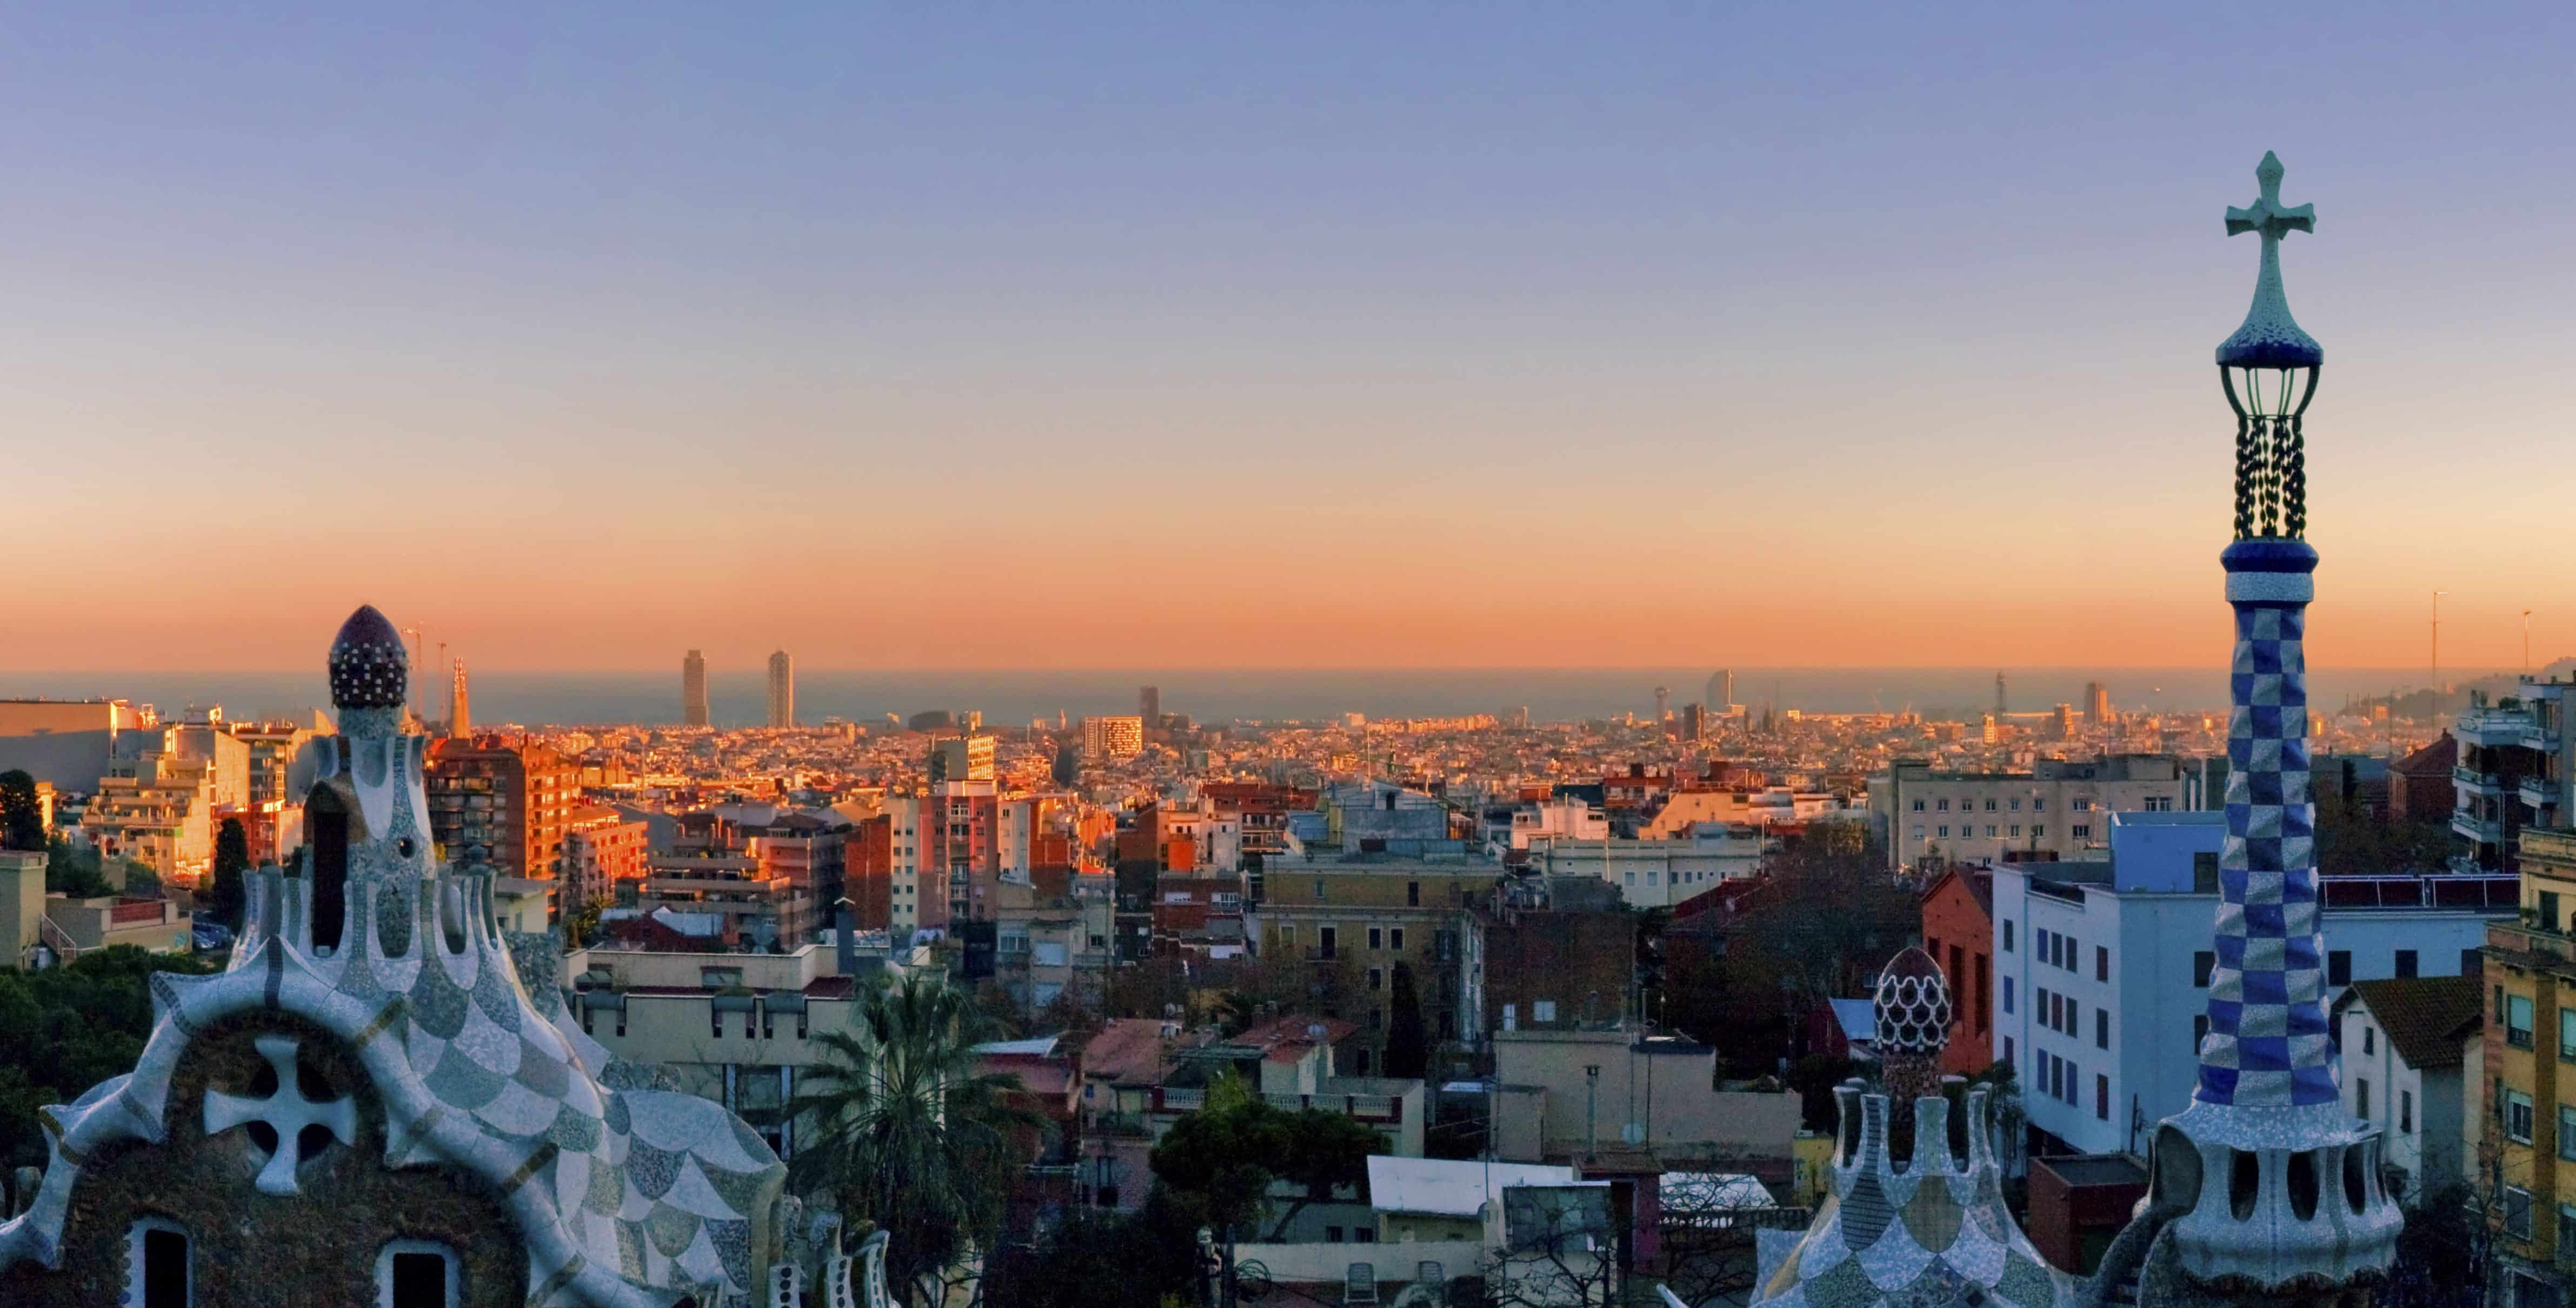 Travel by train in Spain to experience the magic of AVE cities like Barcelona | pic: Zaprittsky